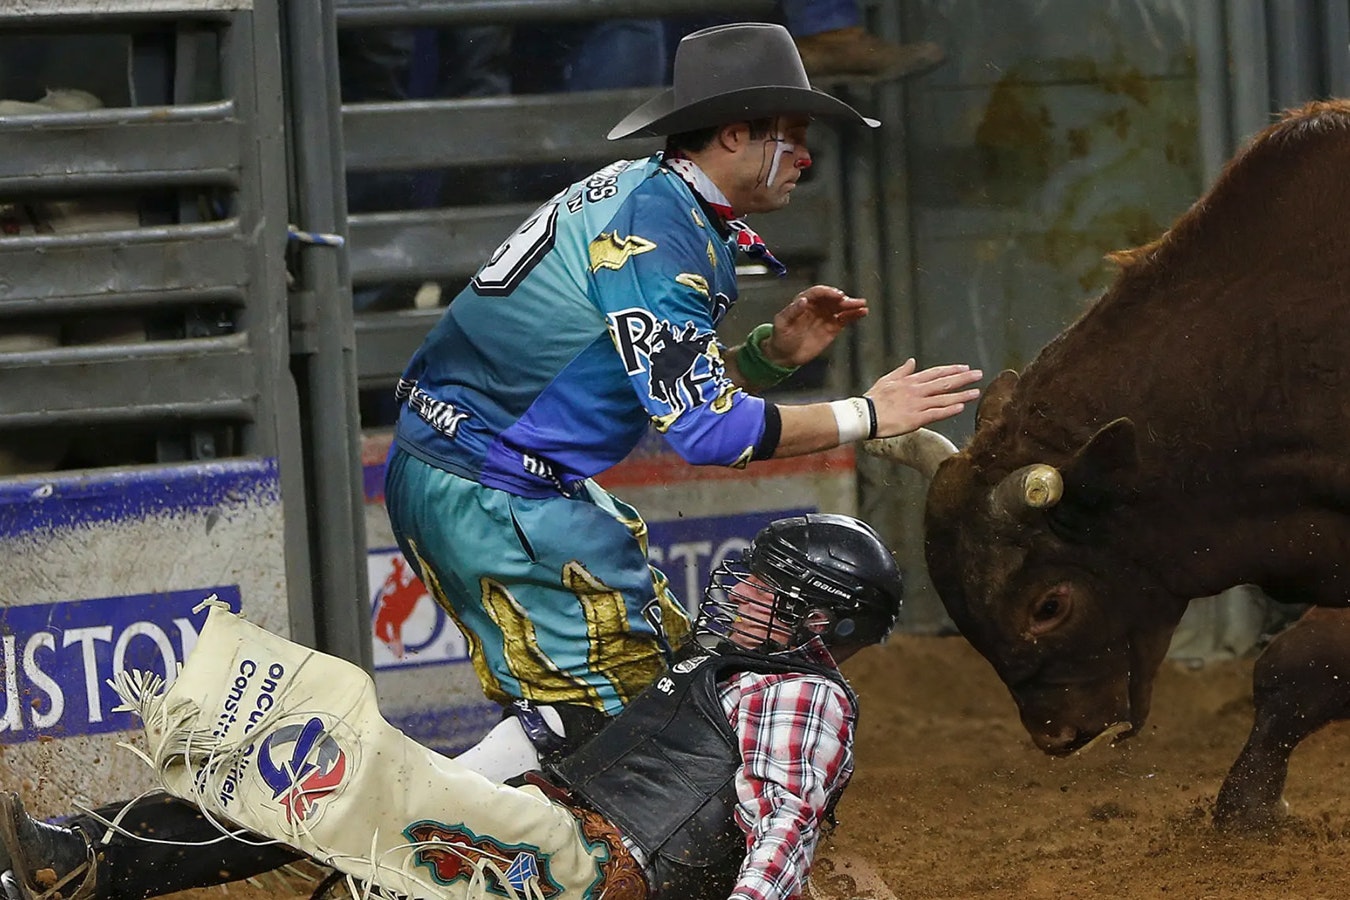 Bullfighter Dusty Tuckness fights off a bull named Hangover as he tries to protect Brennon Eldred after he was thrown during the bull riding competition during the Houston Livestock Show and Rodeo at NRG Stadium on March 13, 2015, in Houston.